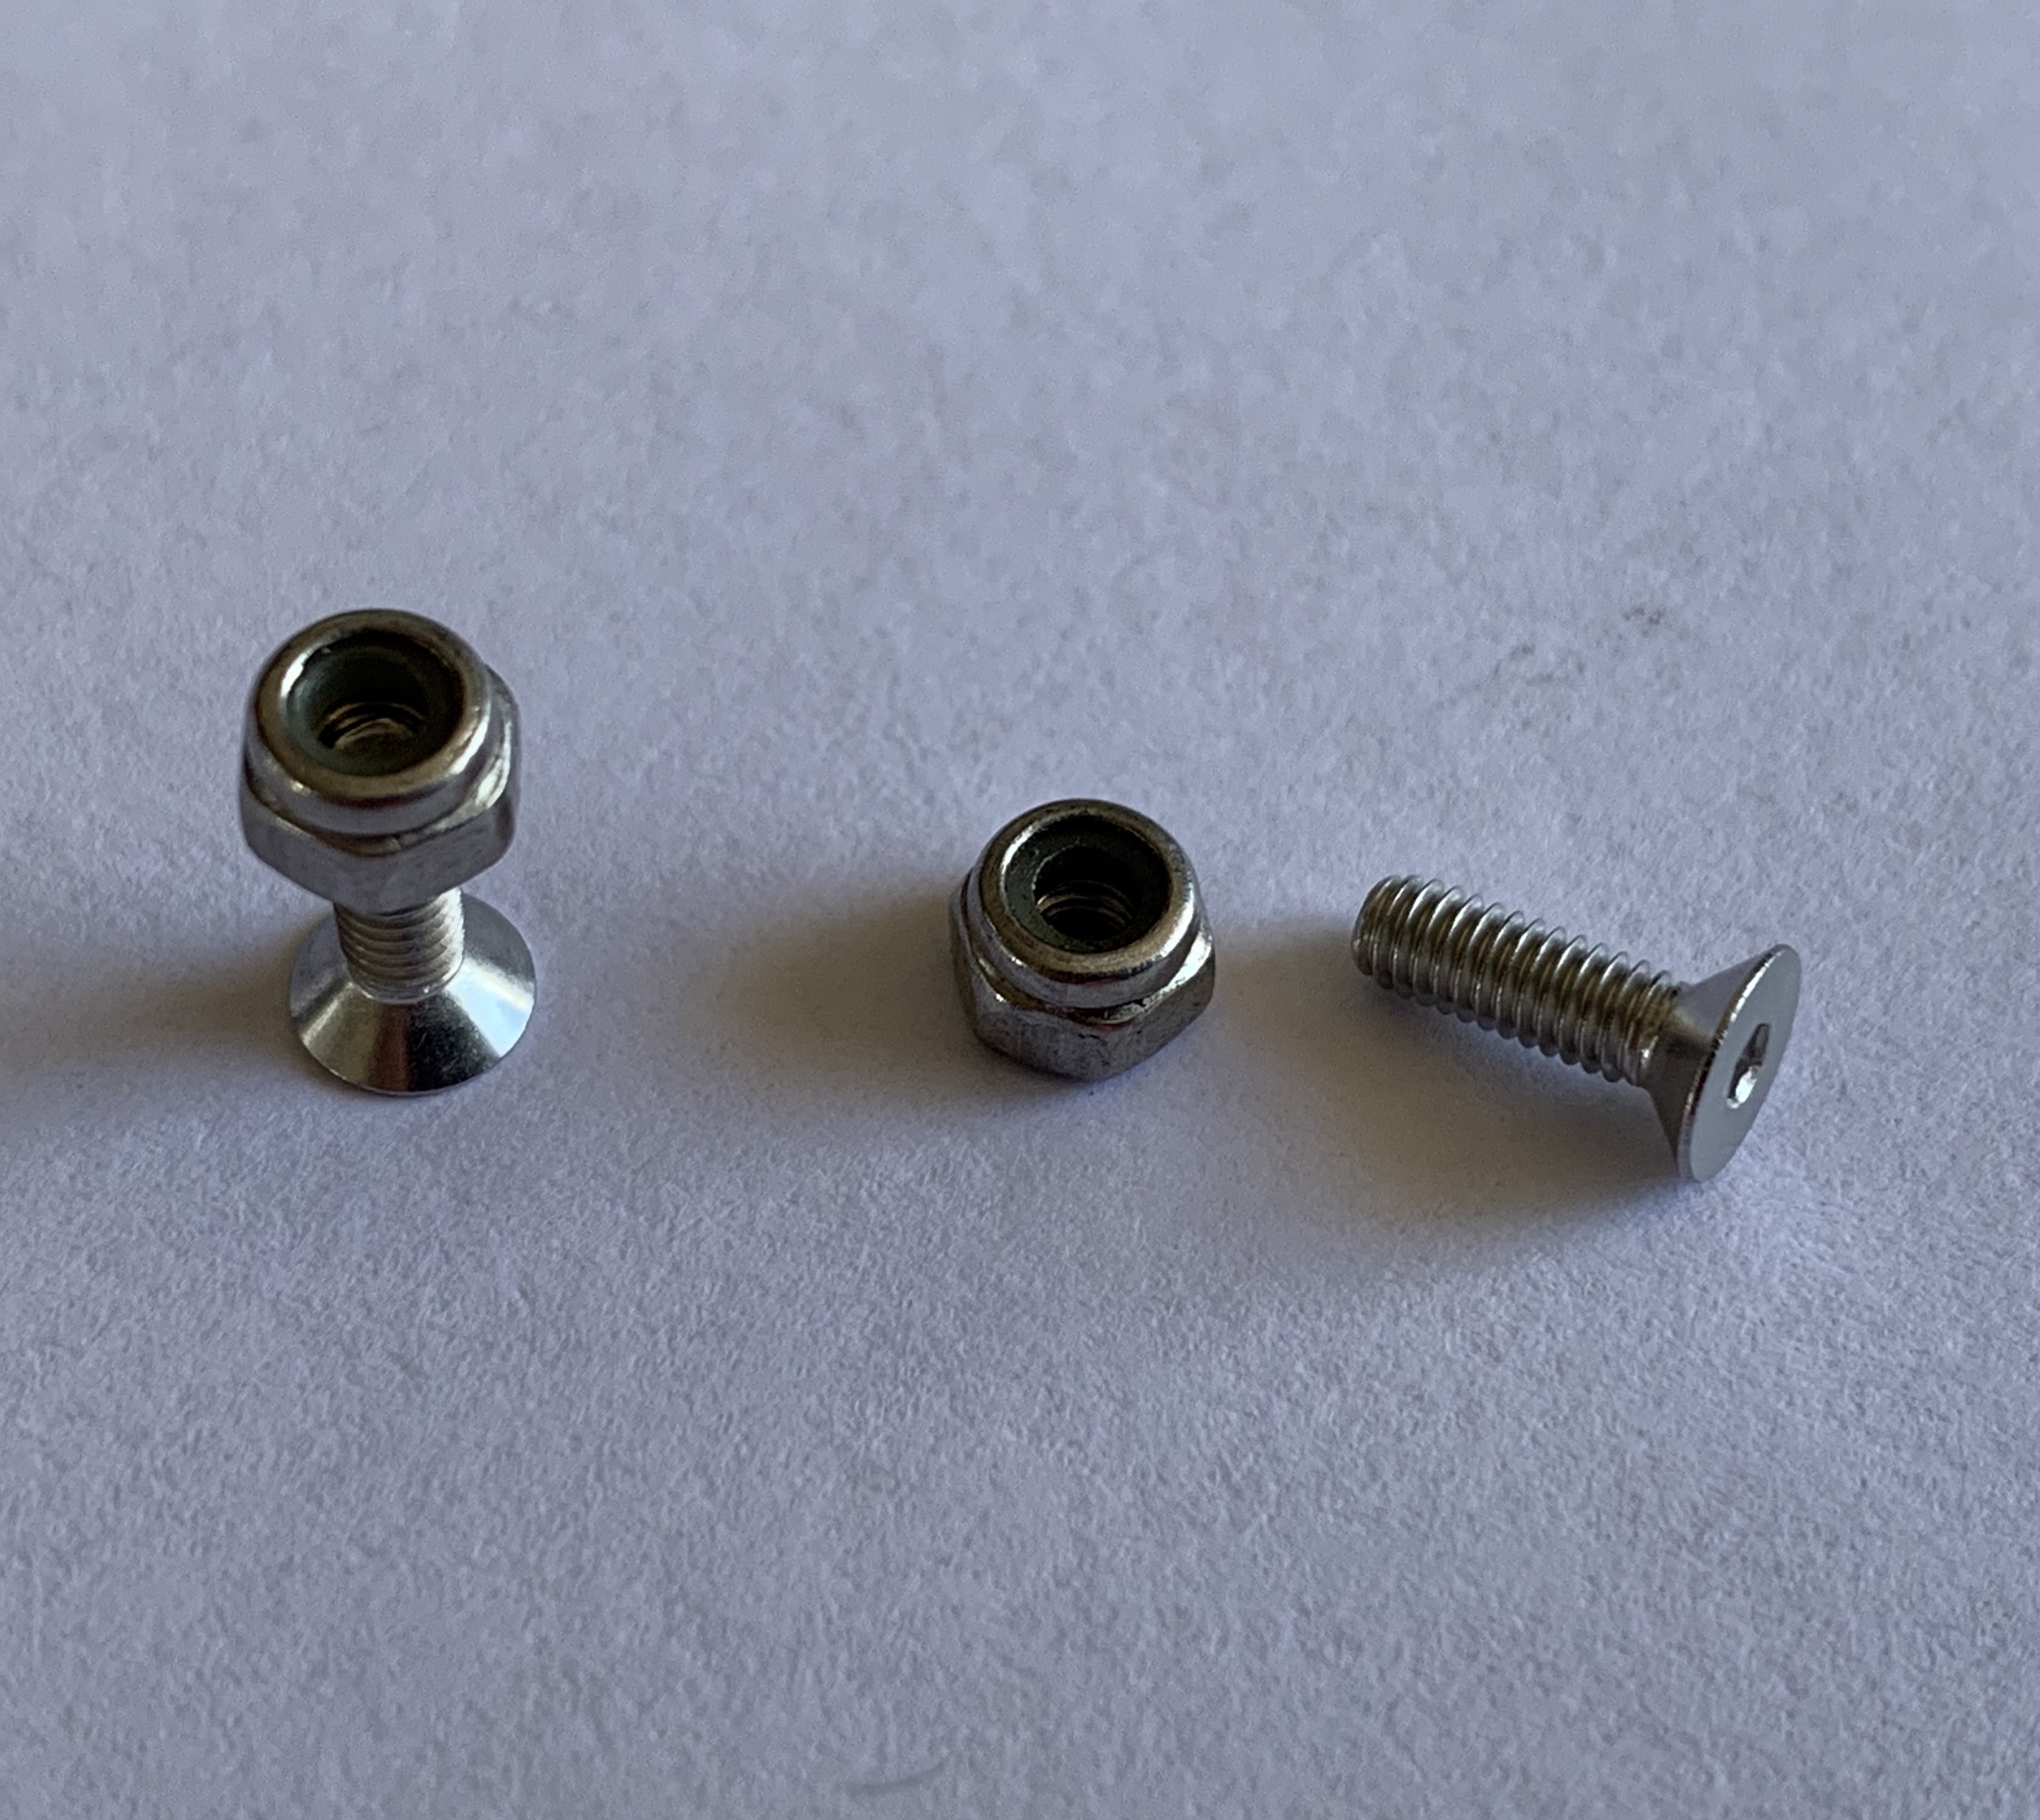 M2.5 x8mm Countersunk screw and nut.jpg